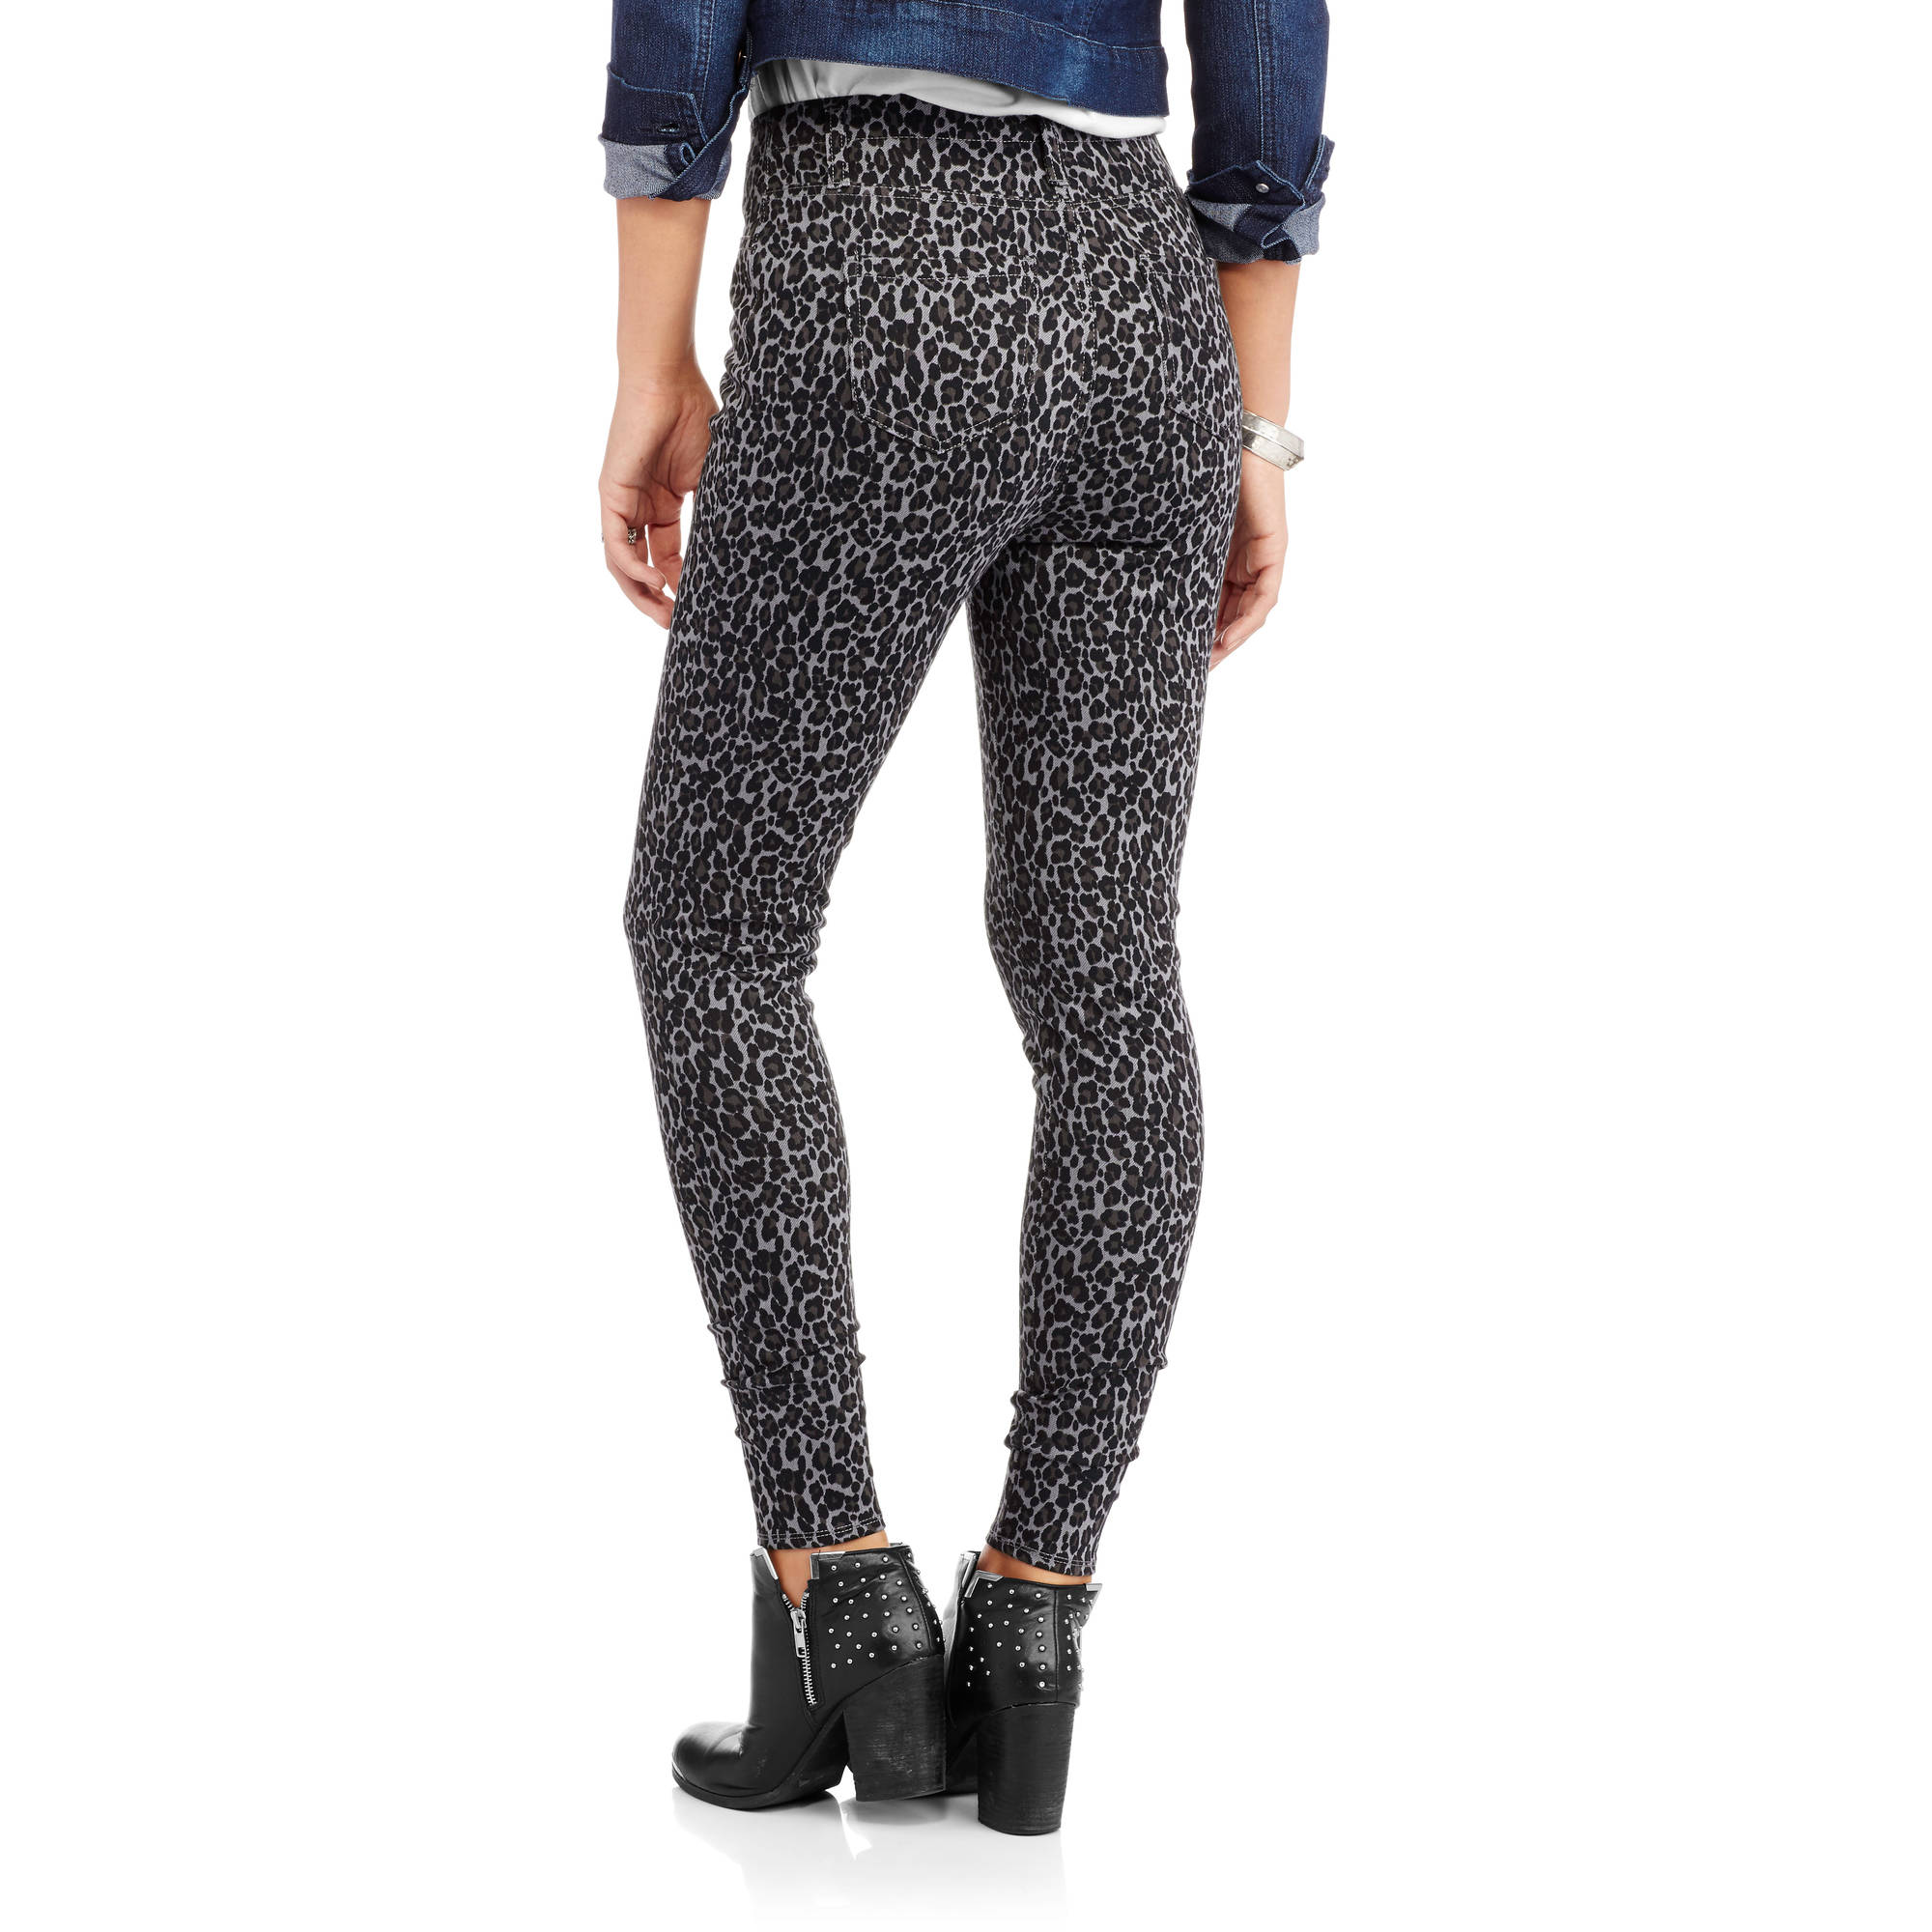 Women's Full Length Printed Knit Color Jegging - image 2 of 2